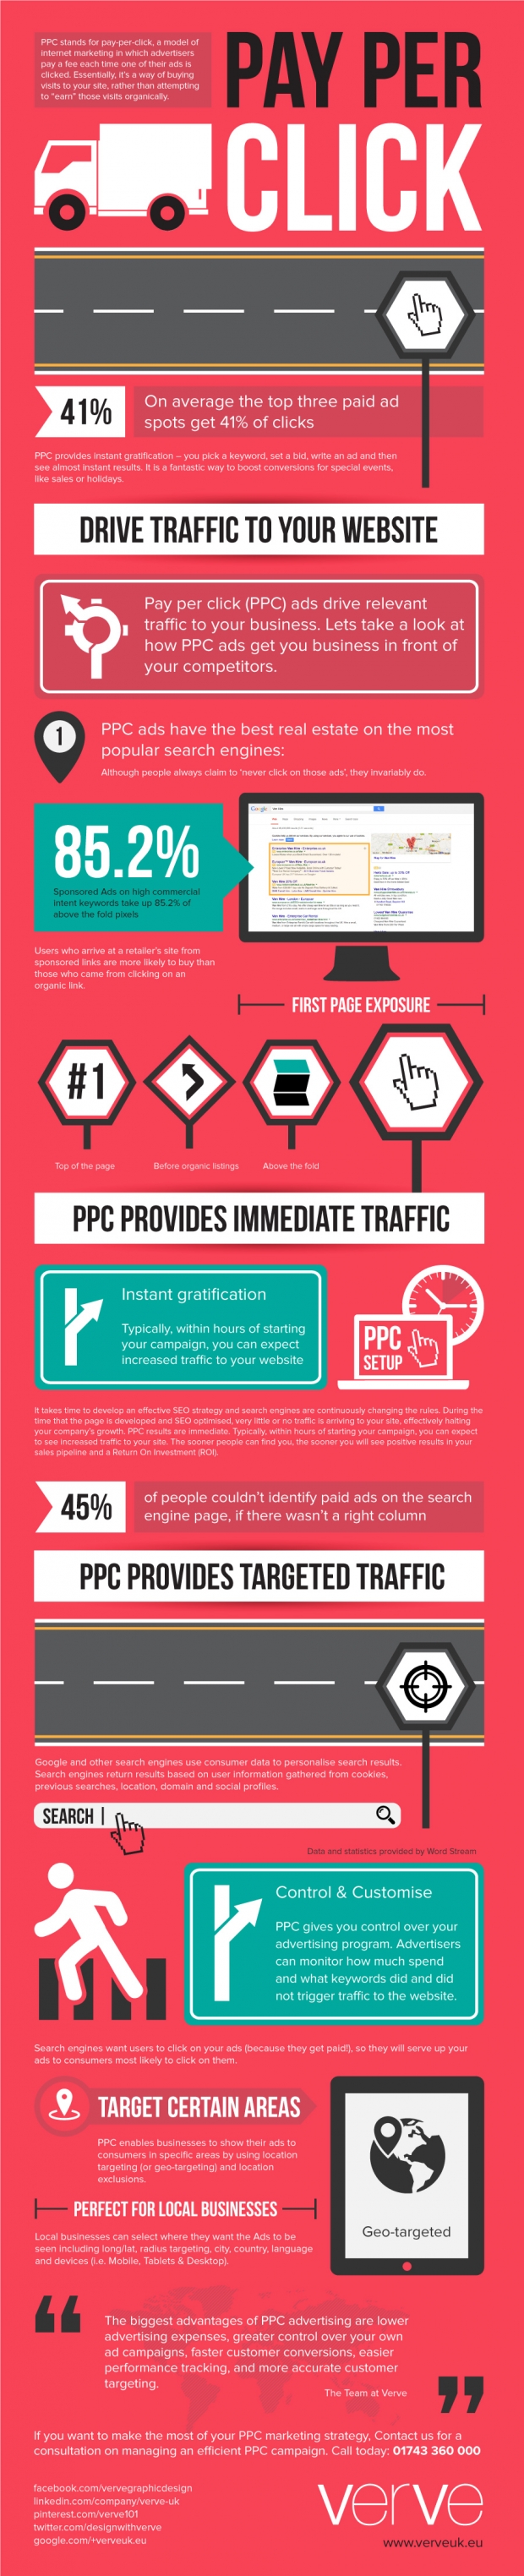 Search Engine Marketing: What Is Pay-Per-Click (PPC) Advertising? [Infographic]